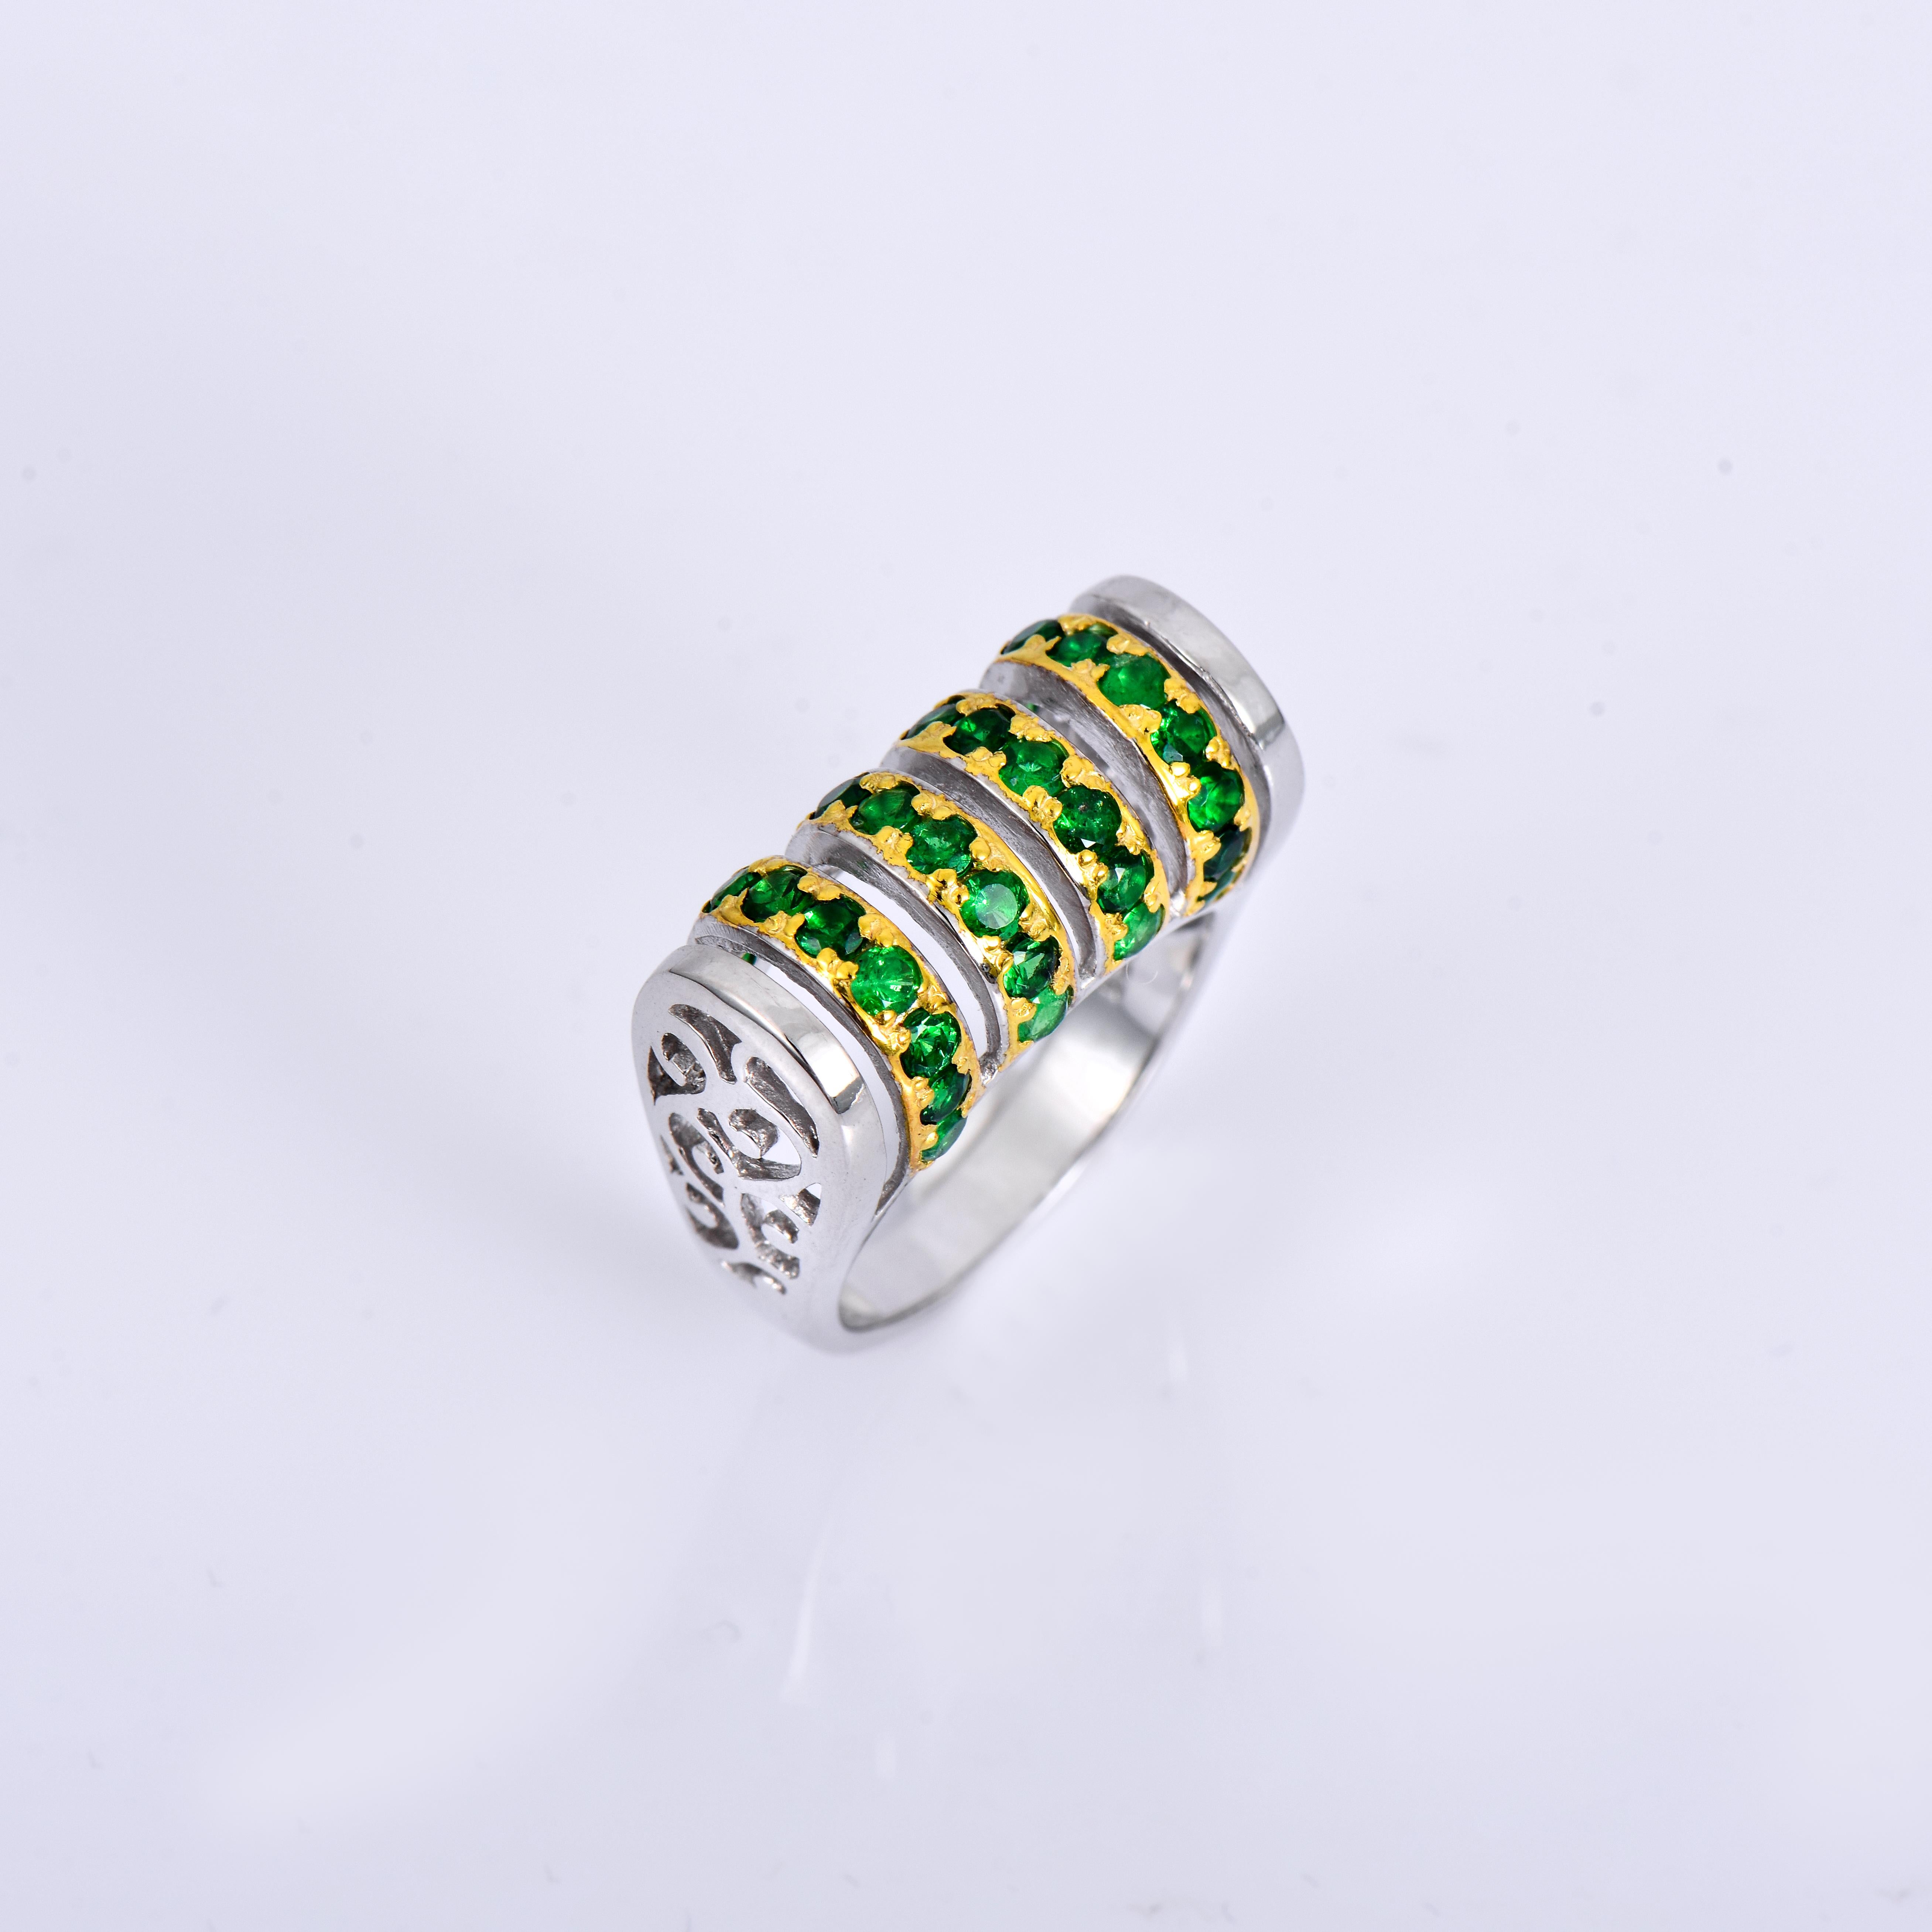 Orloff of Denmark; Tsavorite Garnet ring fashioned out of 925 Sterling Silver, plated with 18 Karat Gold.

This sterling silver ring is adorned with thirty-two delicate green tsavorites, each measuring 2.6 mm in diameter. The tsavorites are